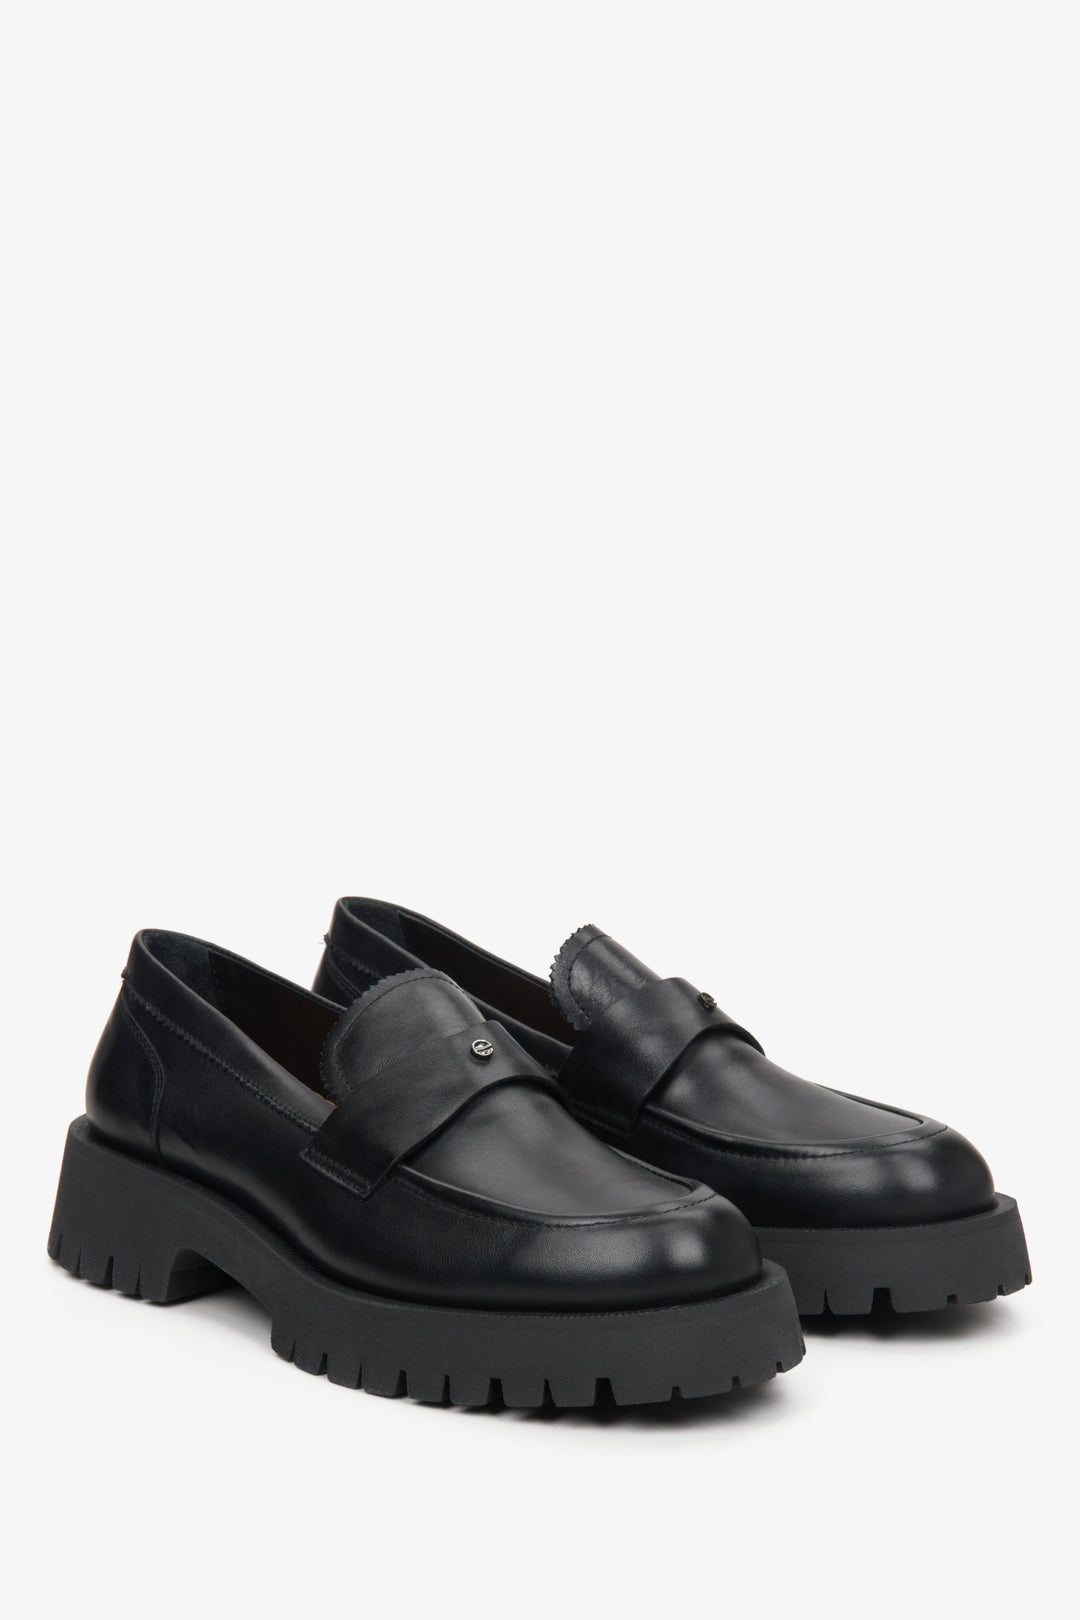 Women's black loafers made of genuine leather with a chunky sole by Estro.